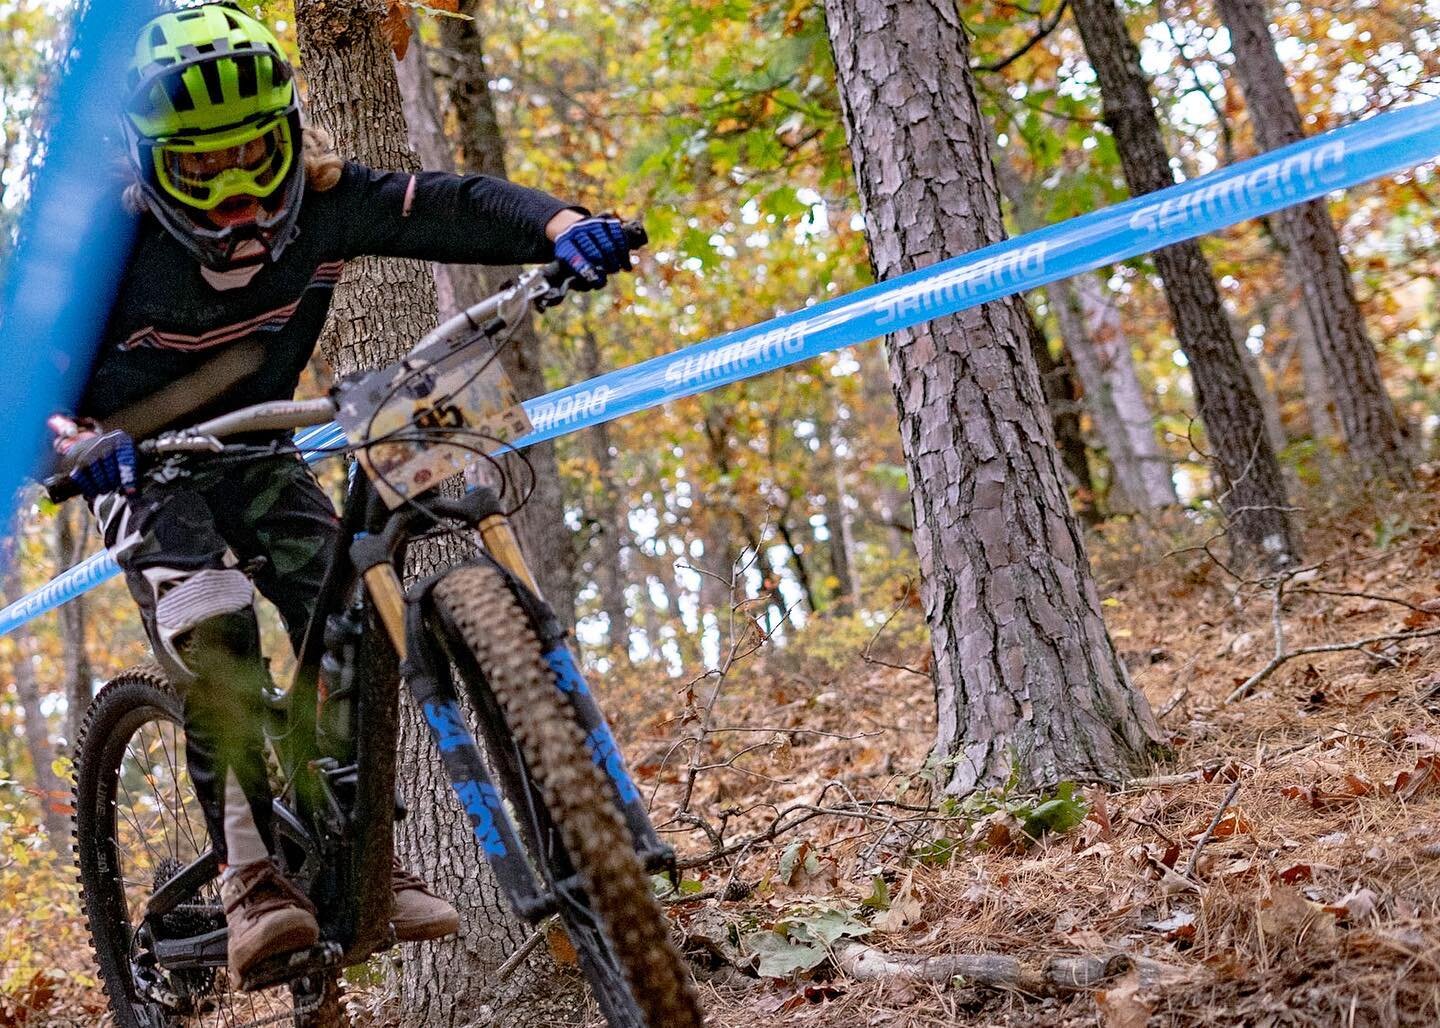 We are getting pretty amped for next week at Great Passion Play for the Redemption Enduro-Round 5 of the 2021 SET!
&mdash;
It&rsquo;s going to be a busy with two events happening over the weekends duration and we want everyone to feel informed. We al